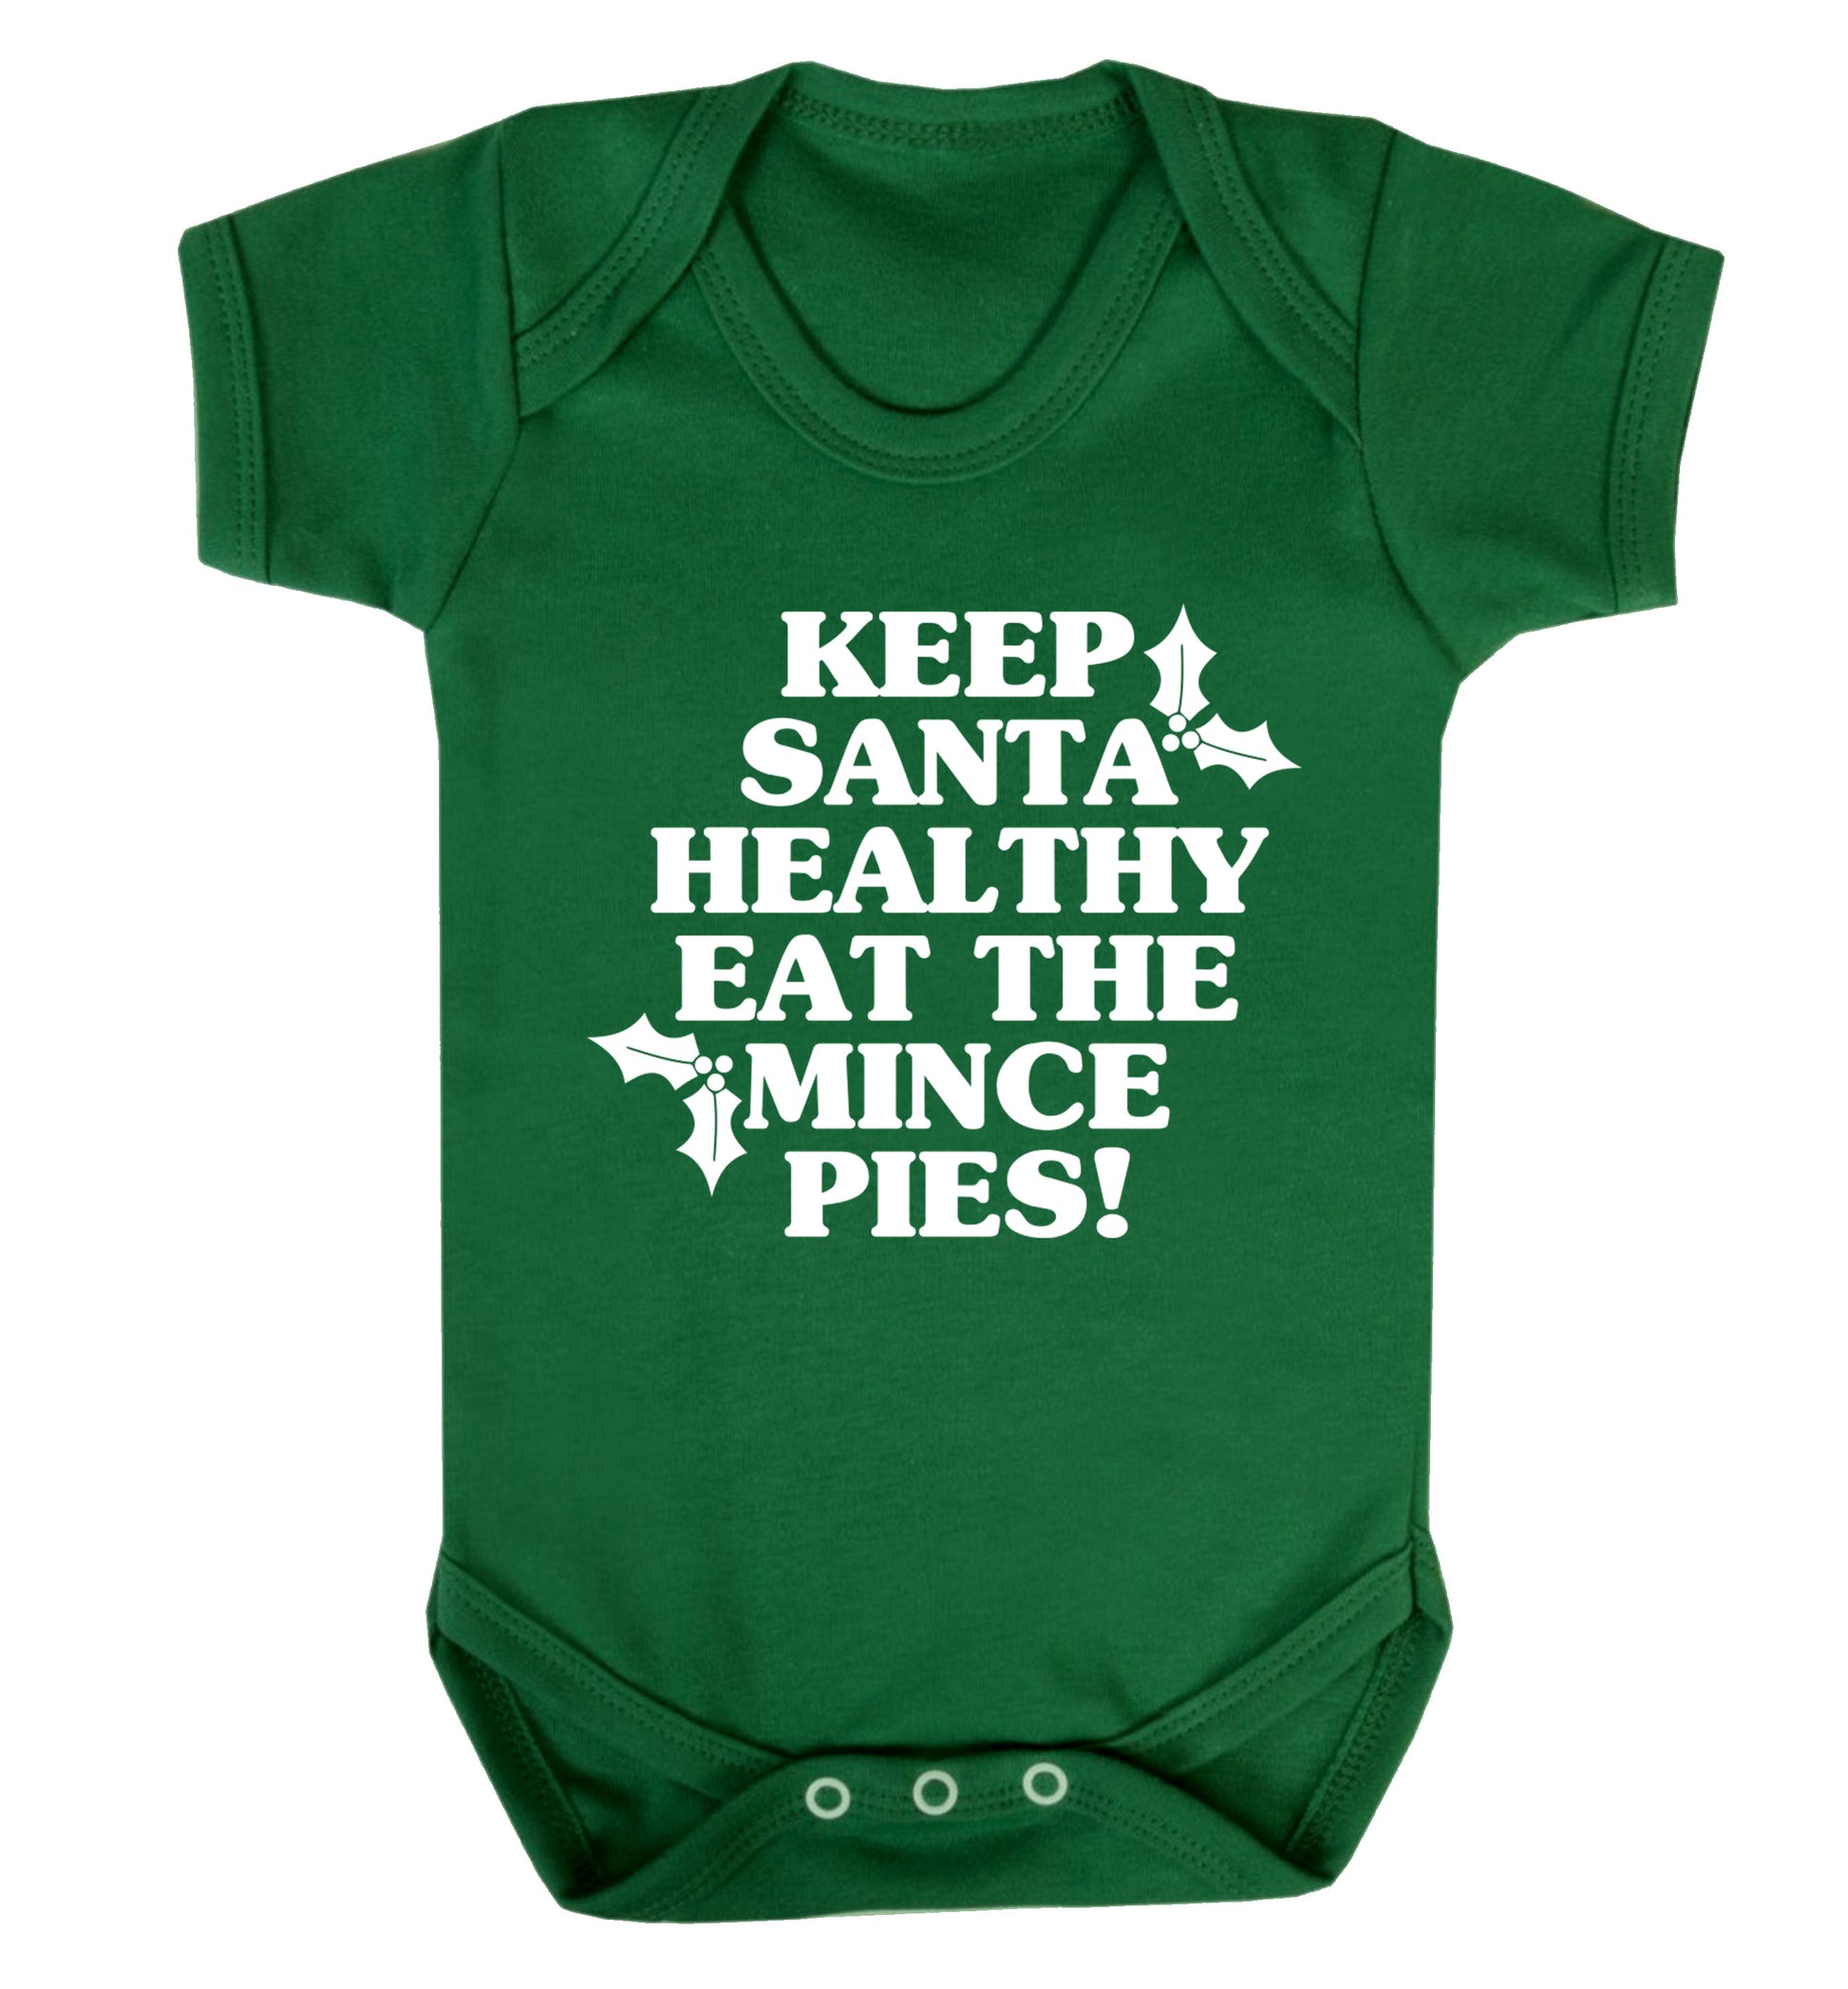 Keep santa healthy eat the mince pies Baby Vest green 18-24 months